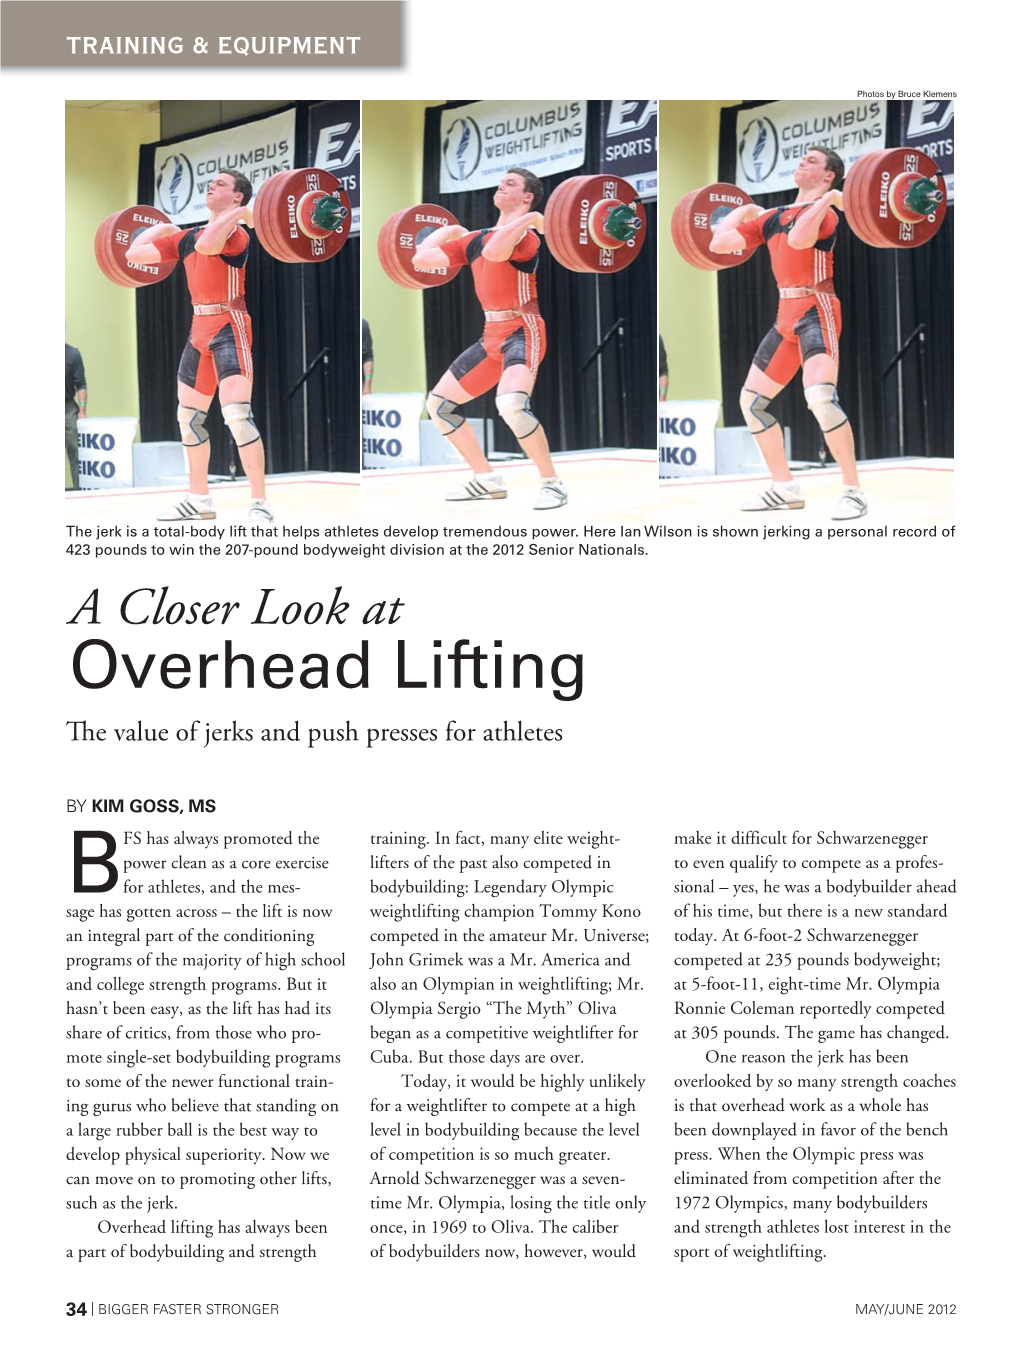 Overhead Lifting Th E Value of Jerks and Push Presses for Athletes